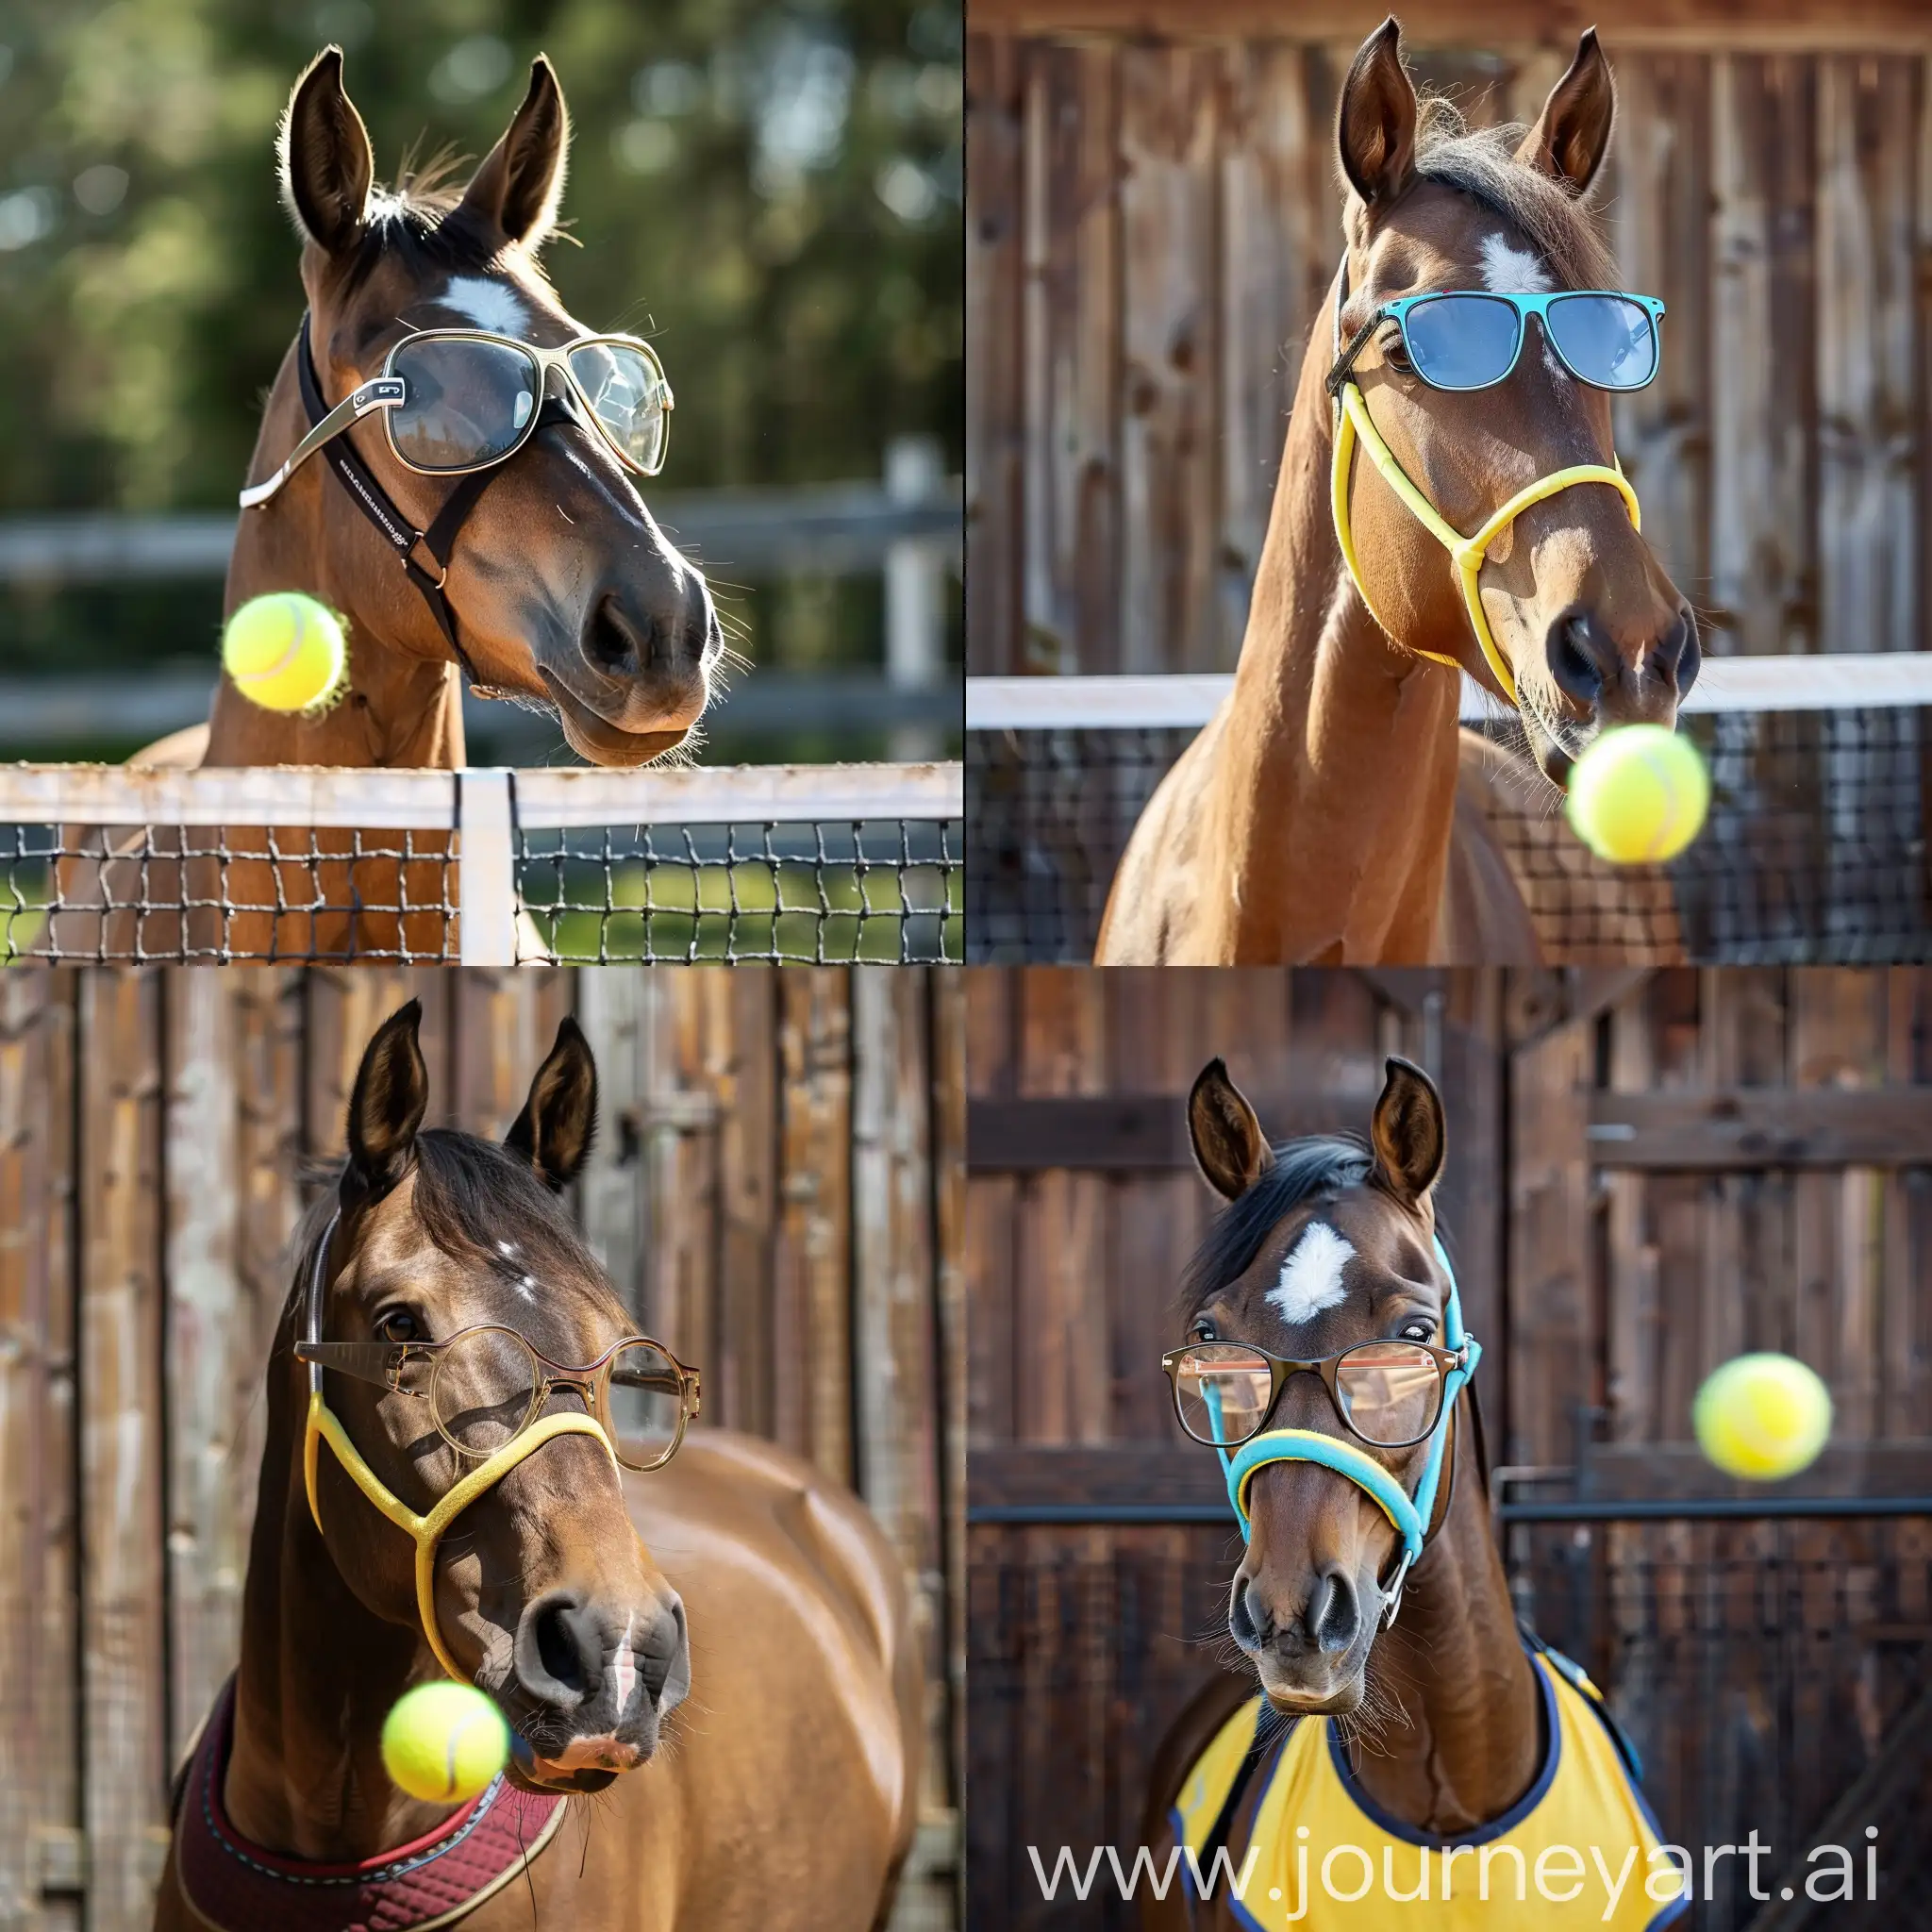 Smart-Horse-Playing-Tennis-with-Glasses